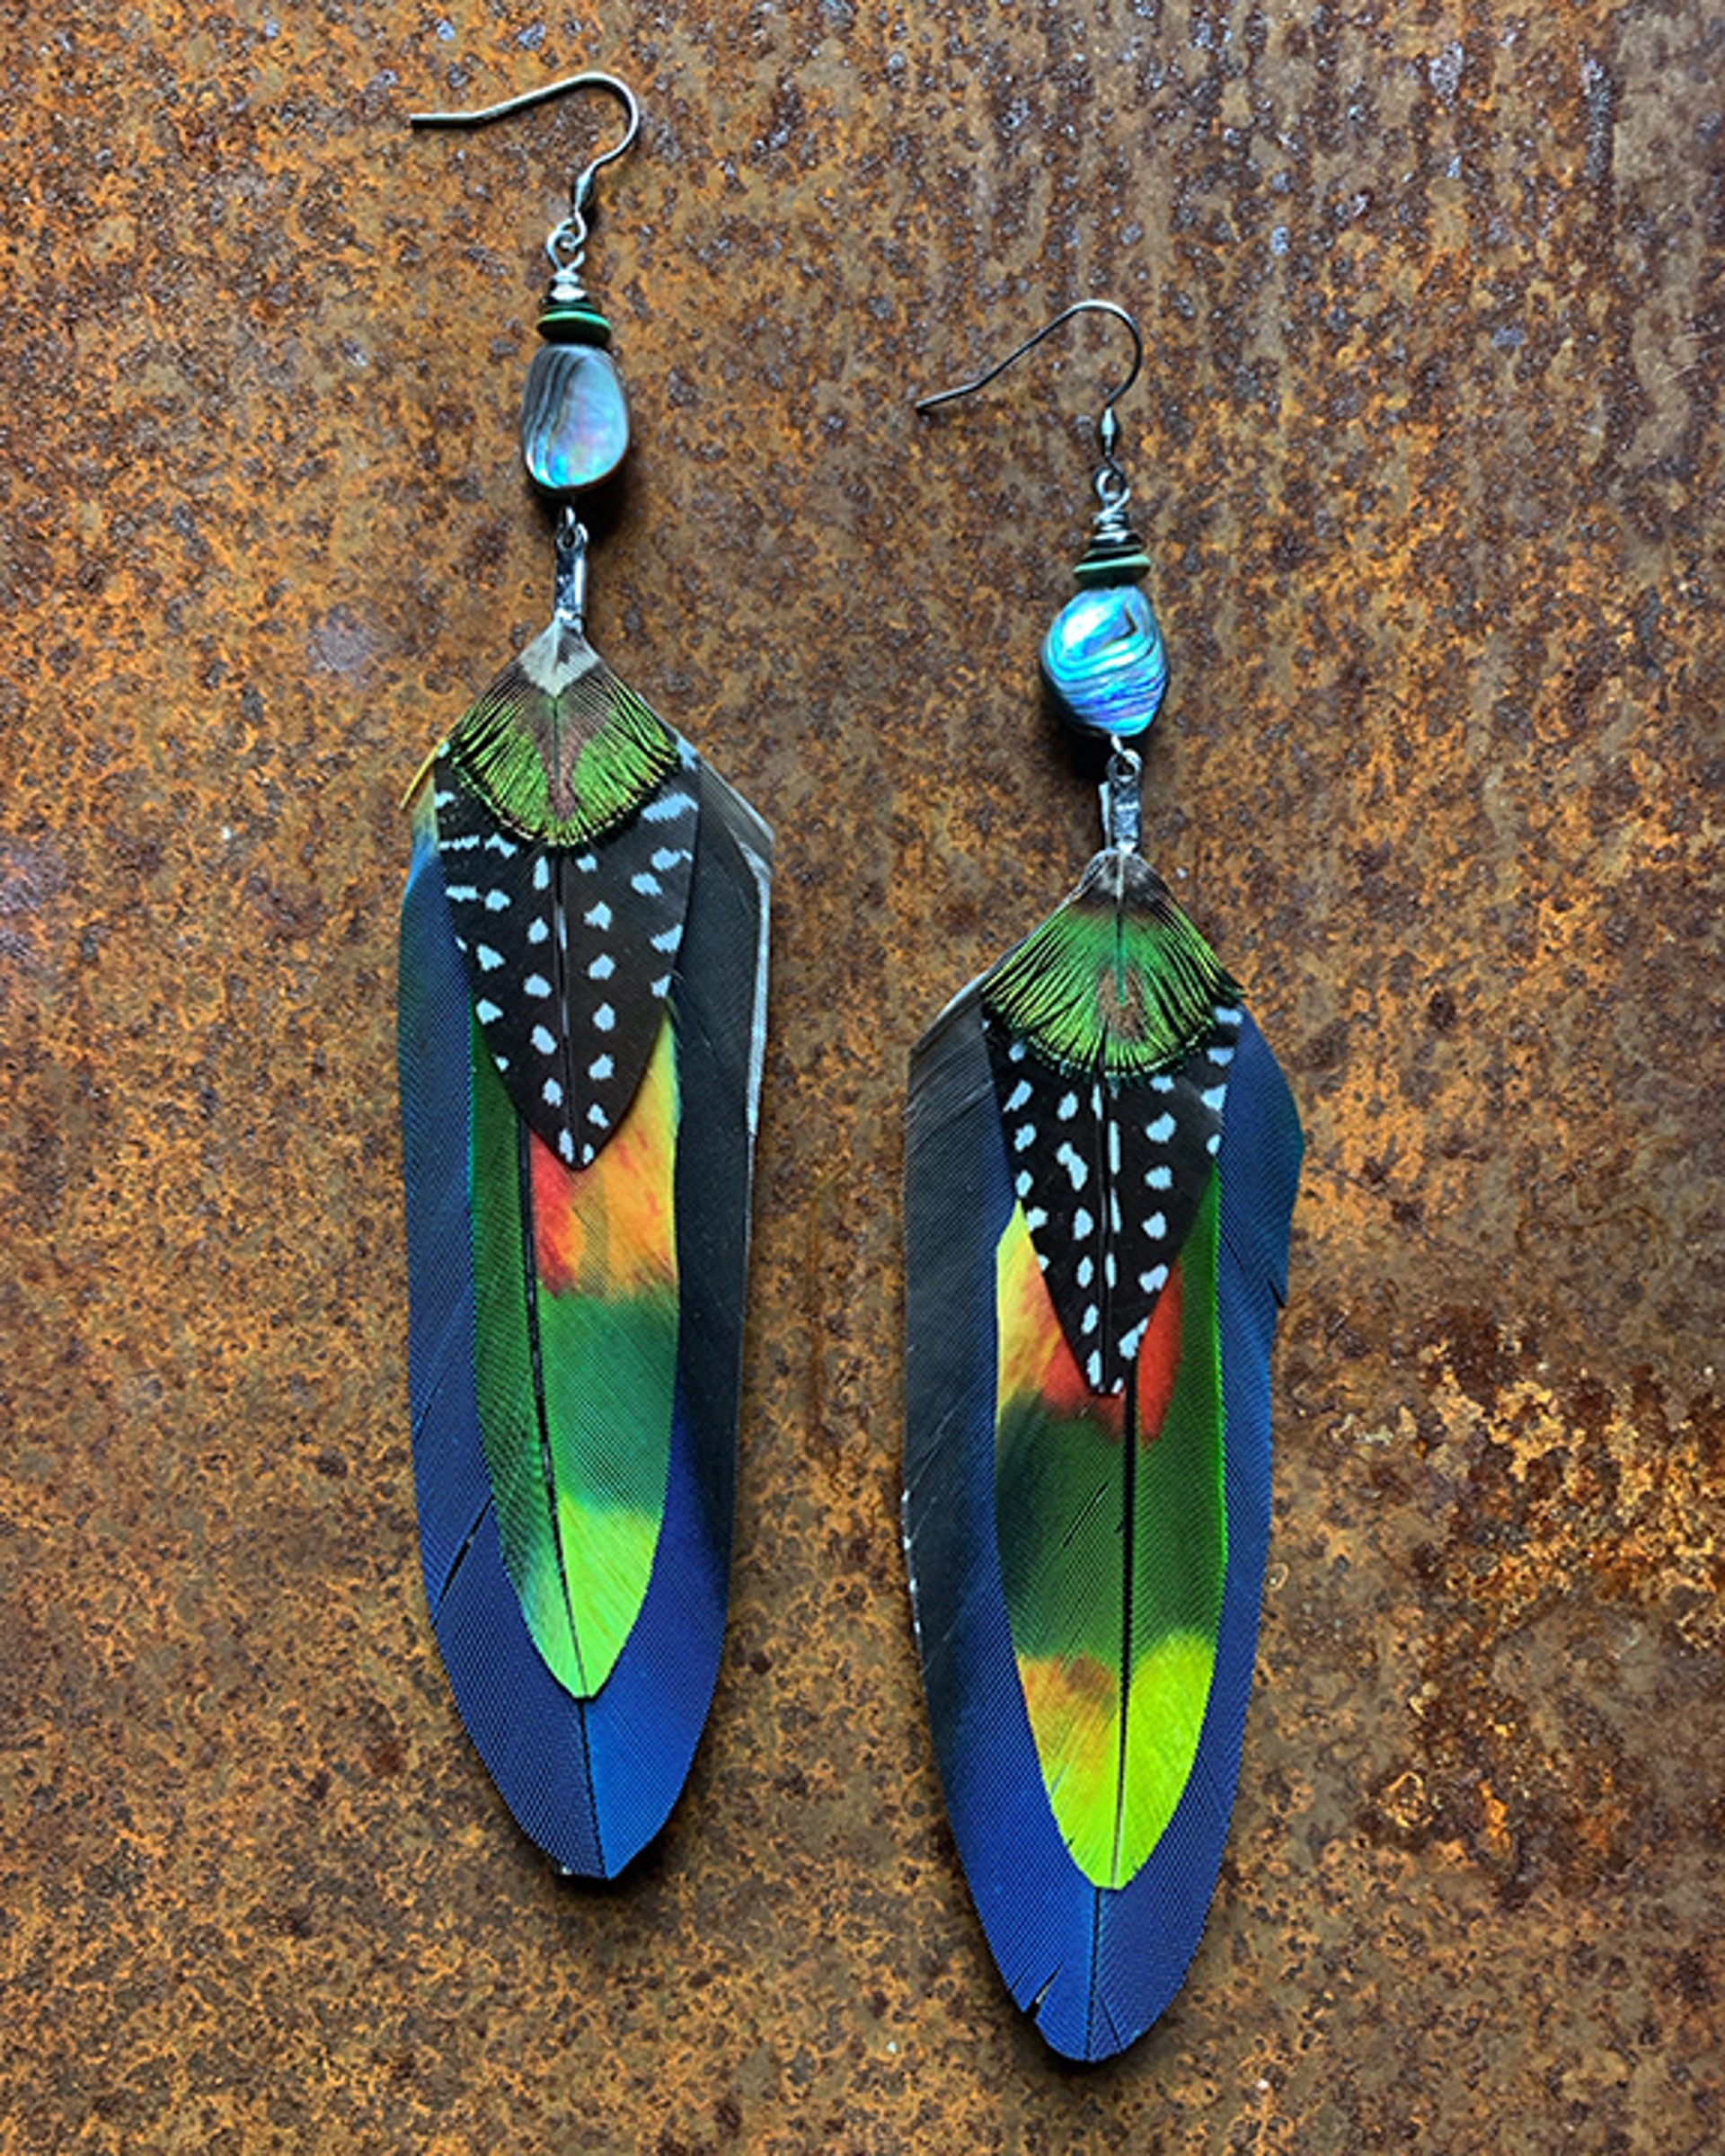 K726 Ethically Sourced Parrot Earrings by Kelly Ormsby